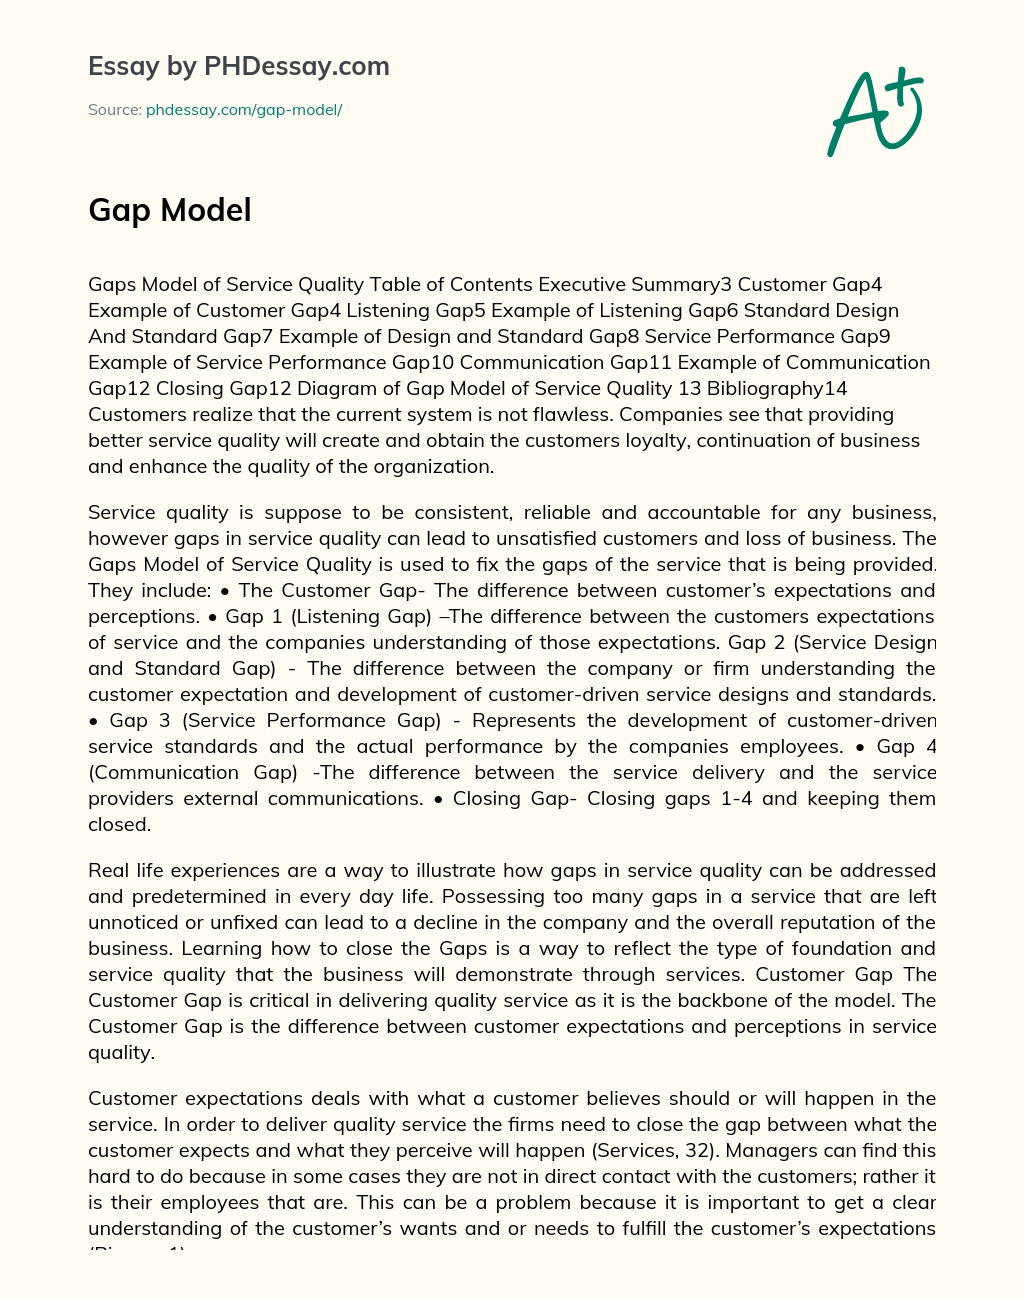 Analyzing the Gaps Model of Service Quality to Improve Customer Satisfaction and Loyalty essay